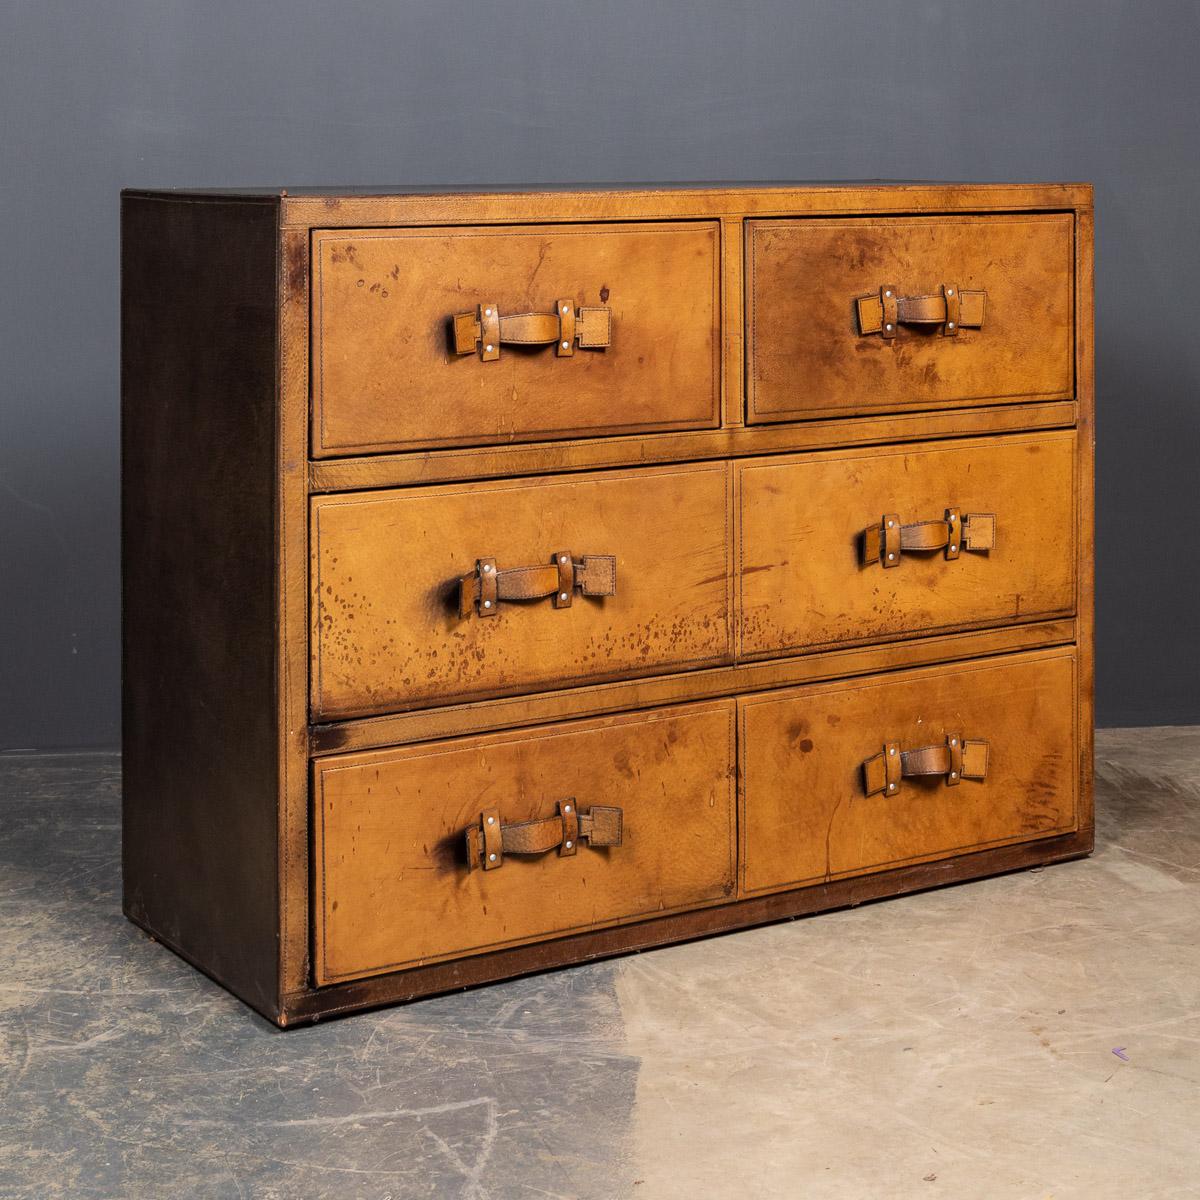 Stunning 20th century English leather covered (in tan hide) 2 over 3 chest of drawers with original leather luggage handles. This chest is oozing style and elegance, this case makes for a fantastic conversation piece, a very practical item suitable